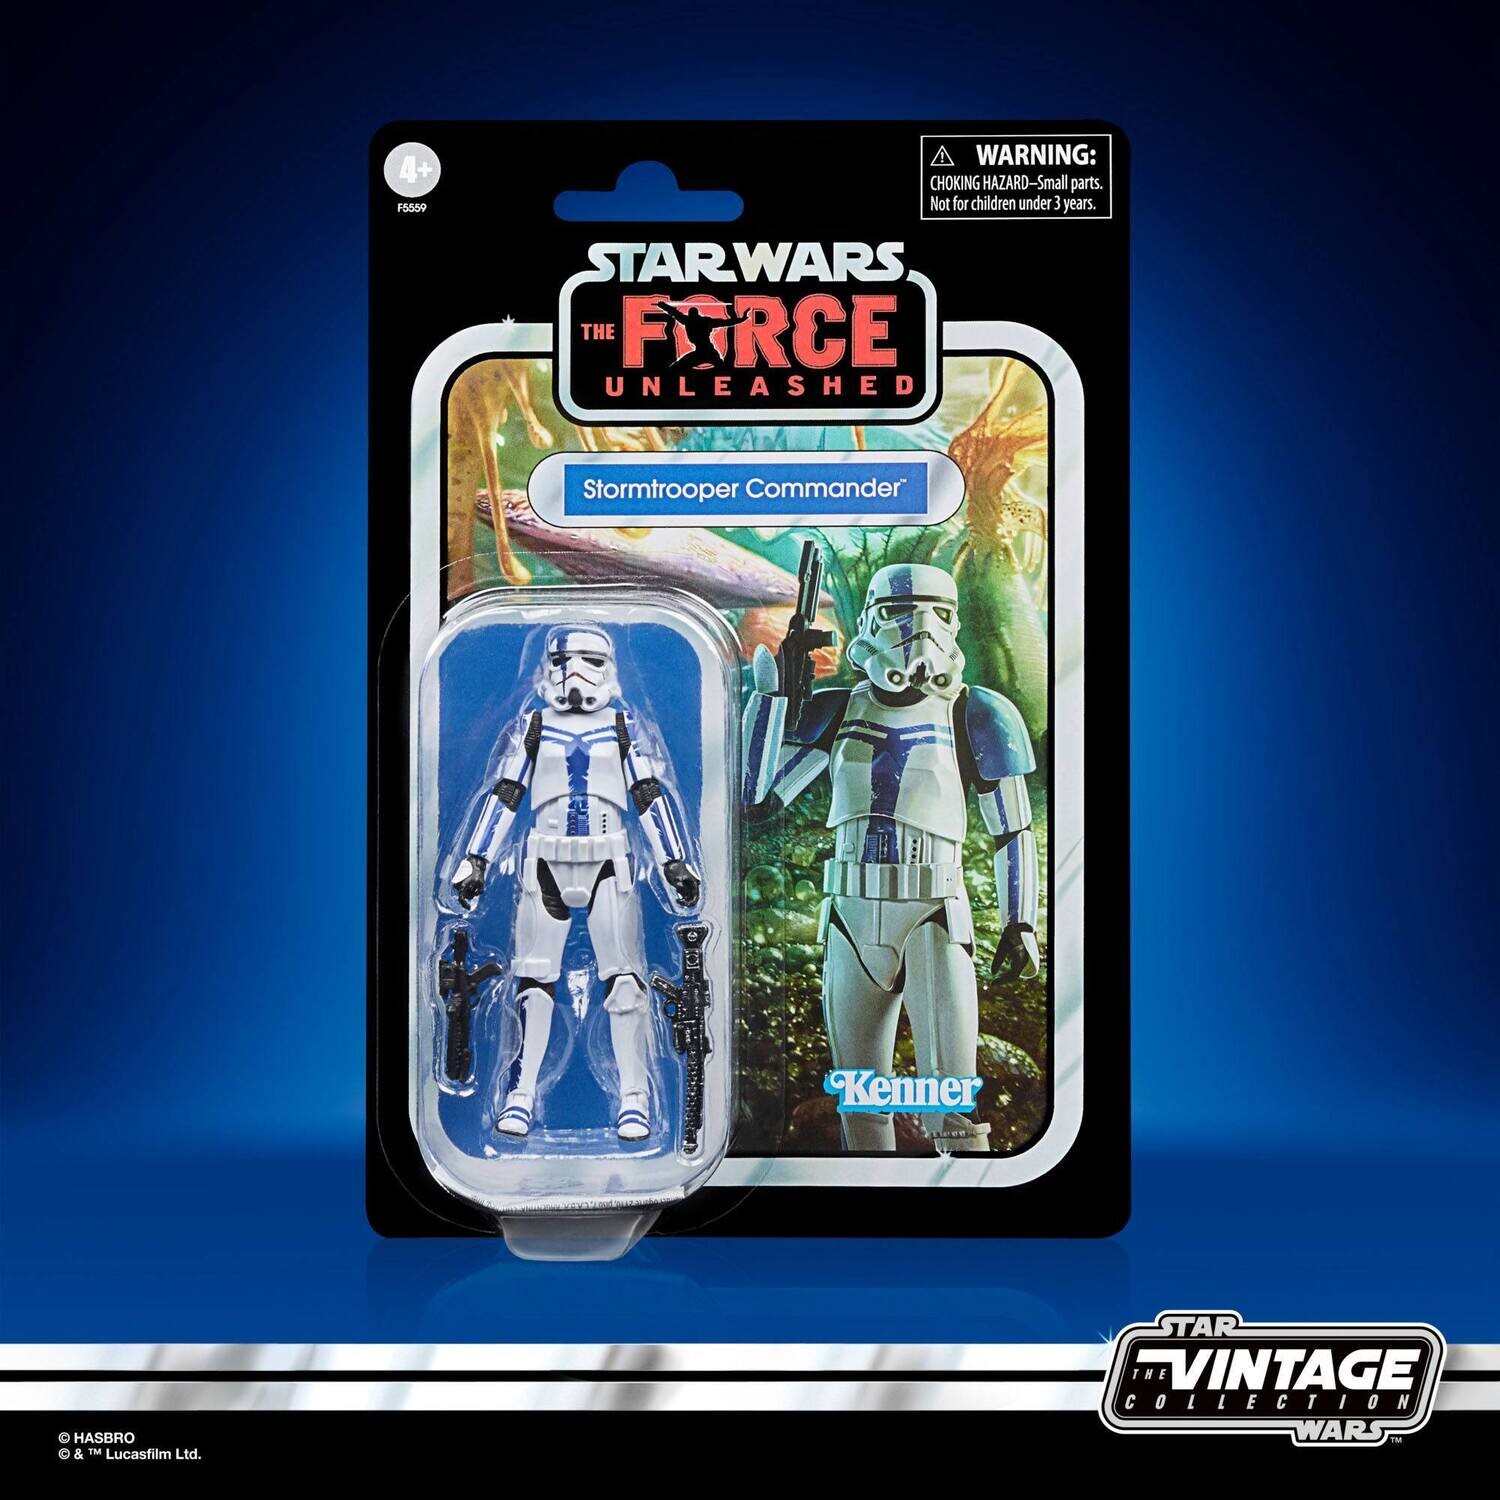 Star Wars The Vintage Collection Gaming Greats The Force Unleashed Stormtrooper Commander Exclusive